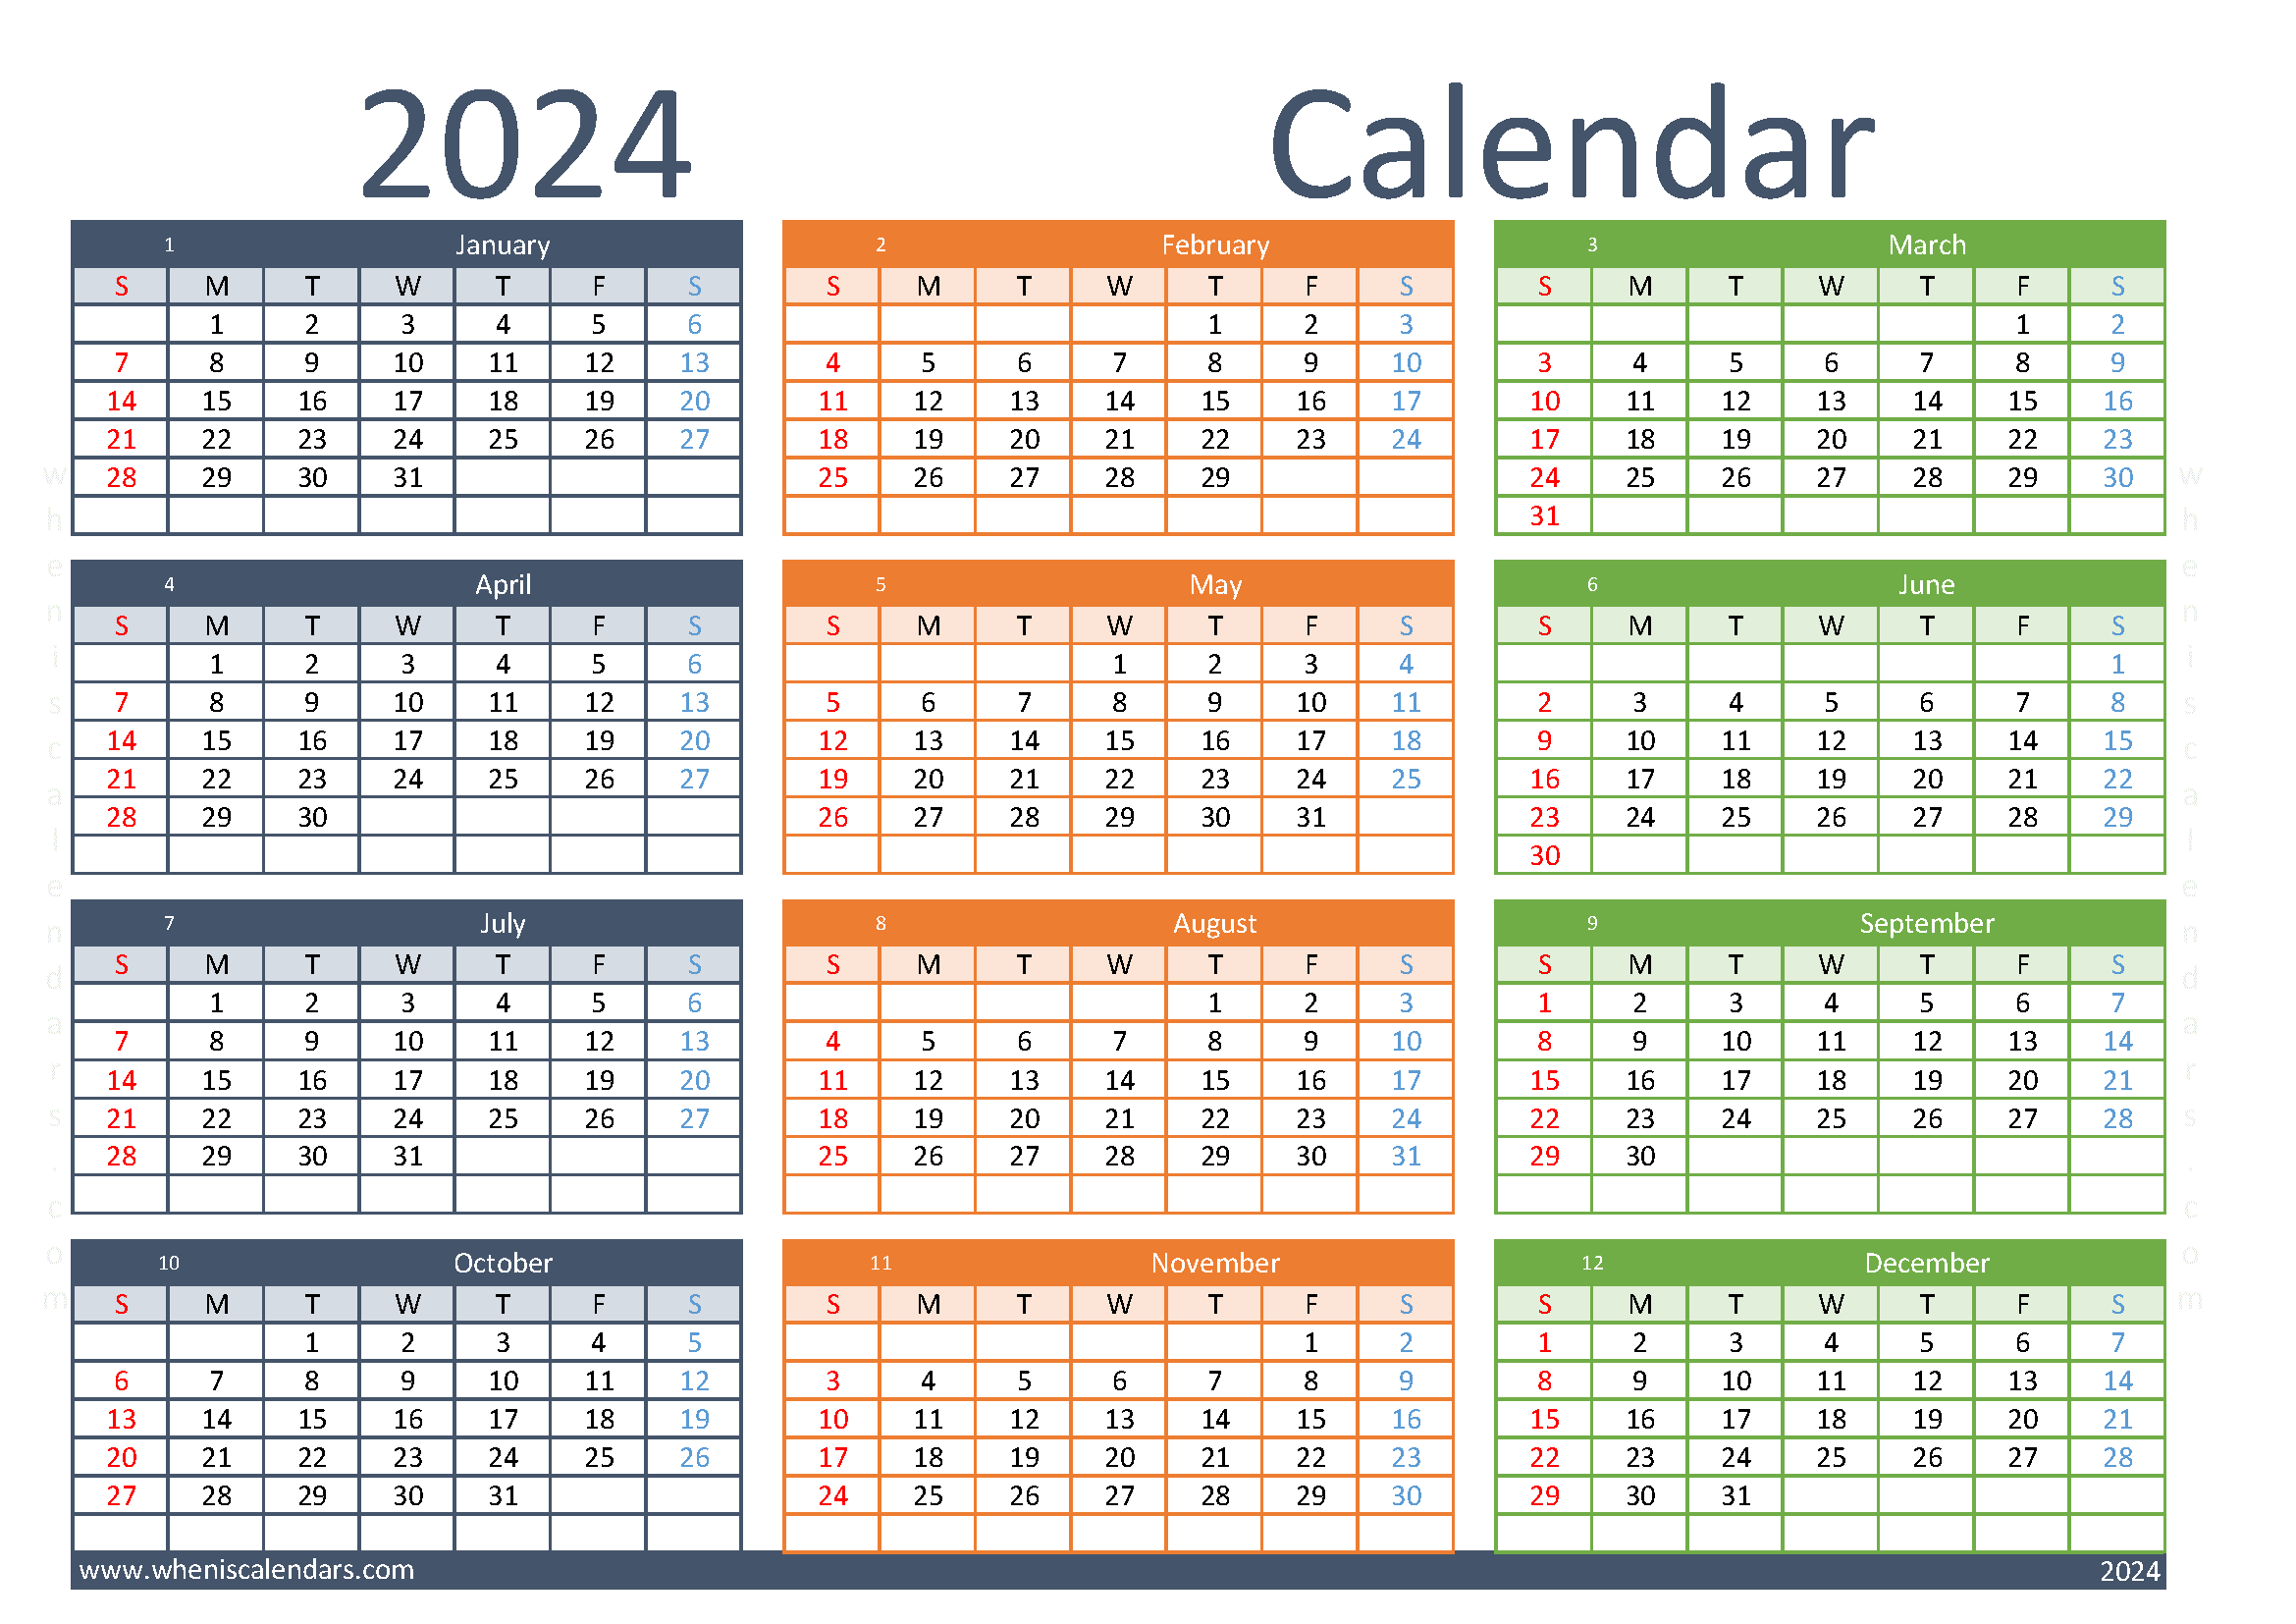 free printable 2024 Calendar yearly A4 in horizontal landscape colorful design